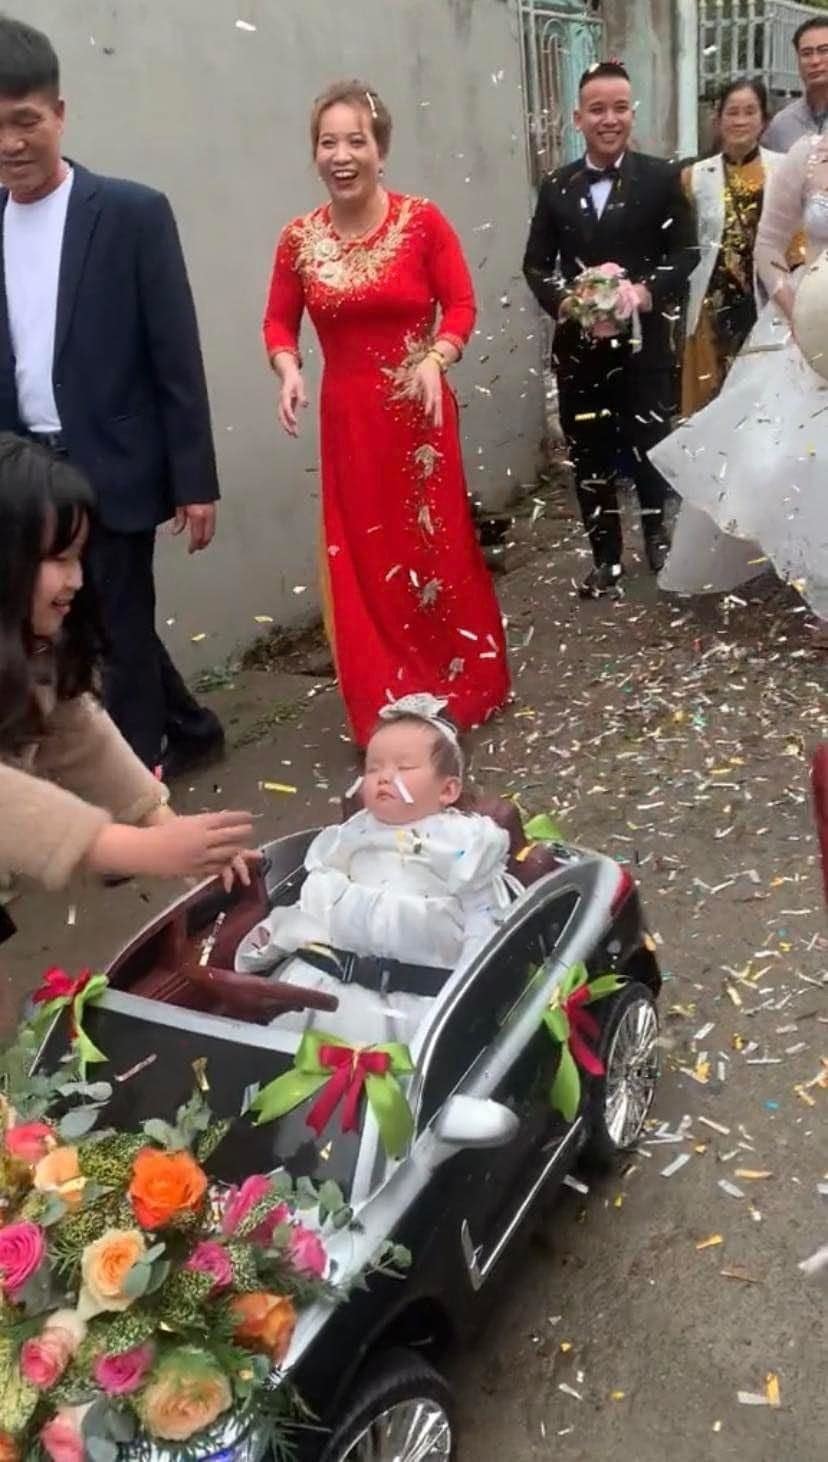 Funny scene of a baby sleeping on a 'flower car' in the middle of a royal procession of brides